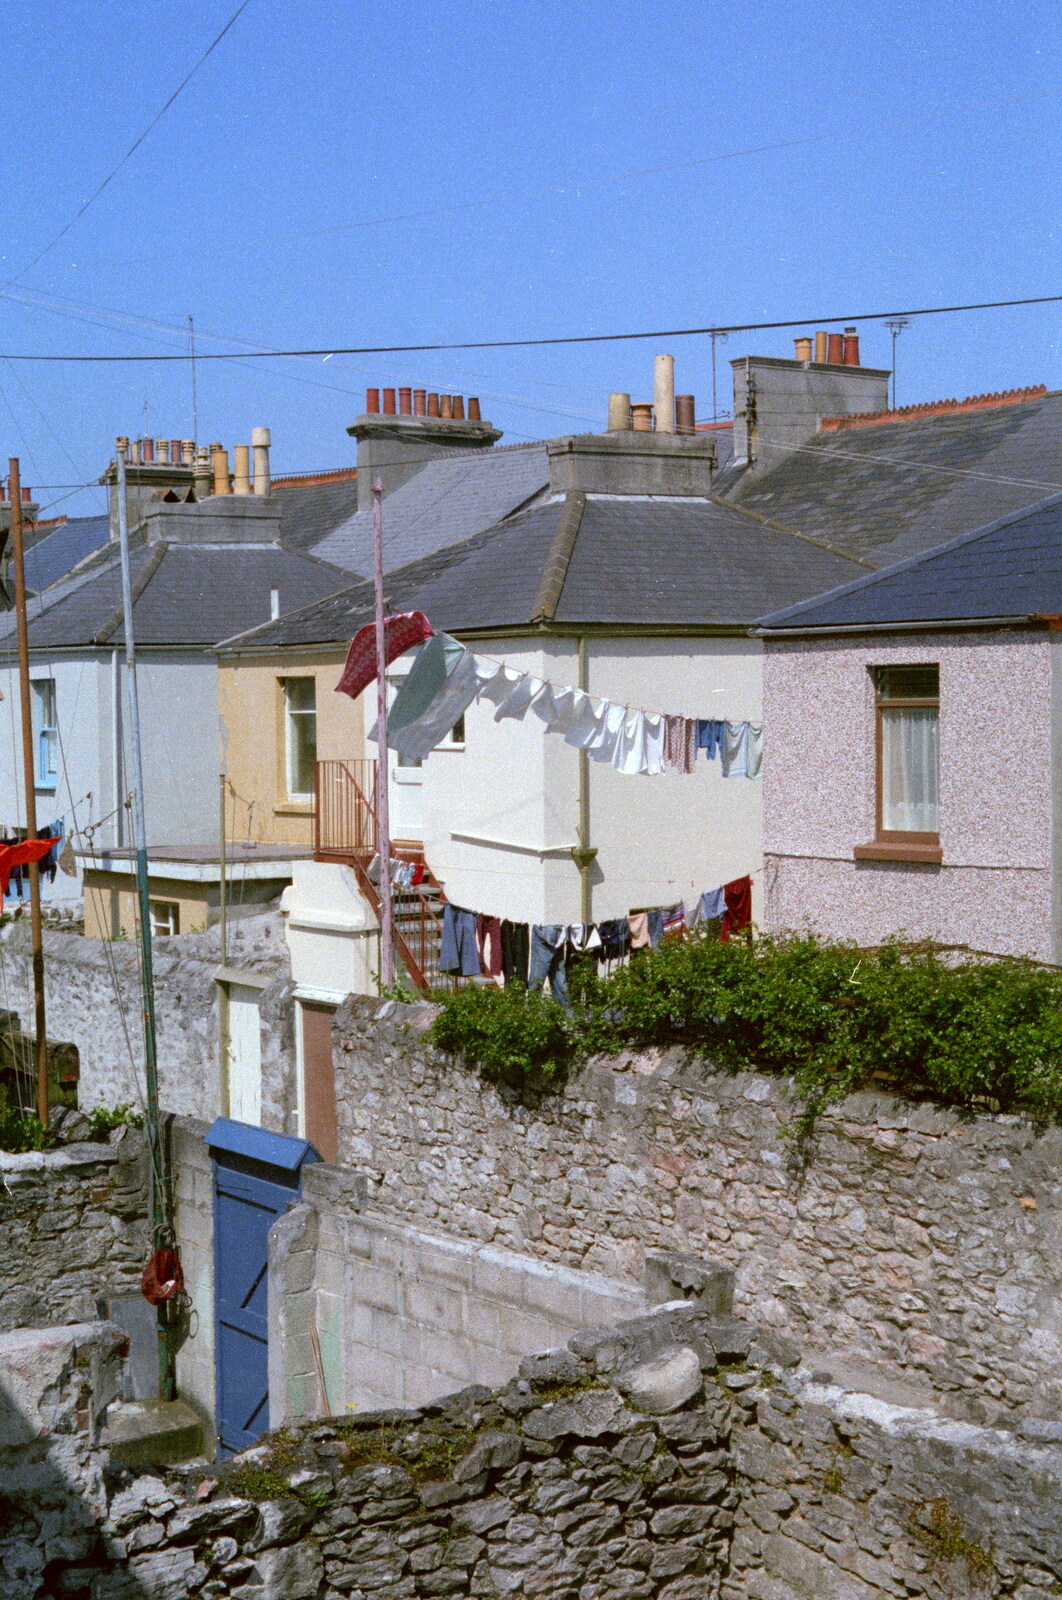 Another photo out of the bedroom window from Uni: Night and Day on the Barbican, Plymouth, Devon - 1st May 1986